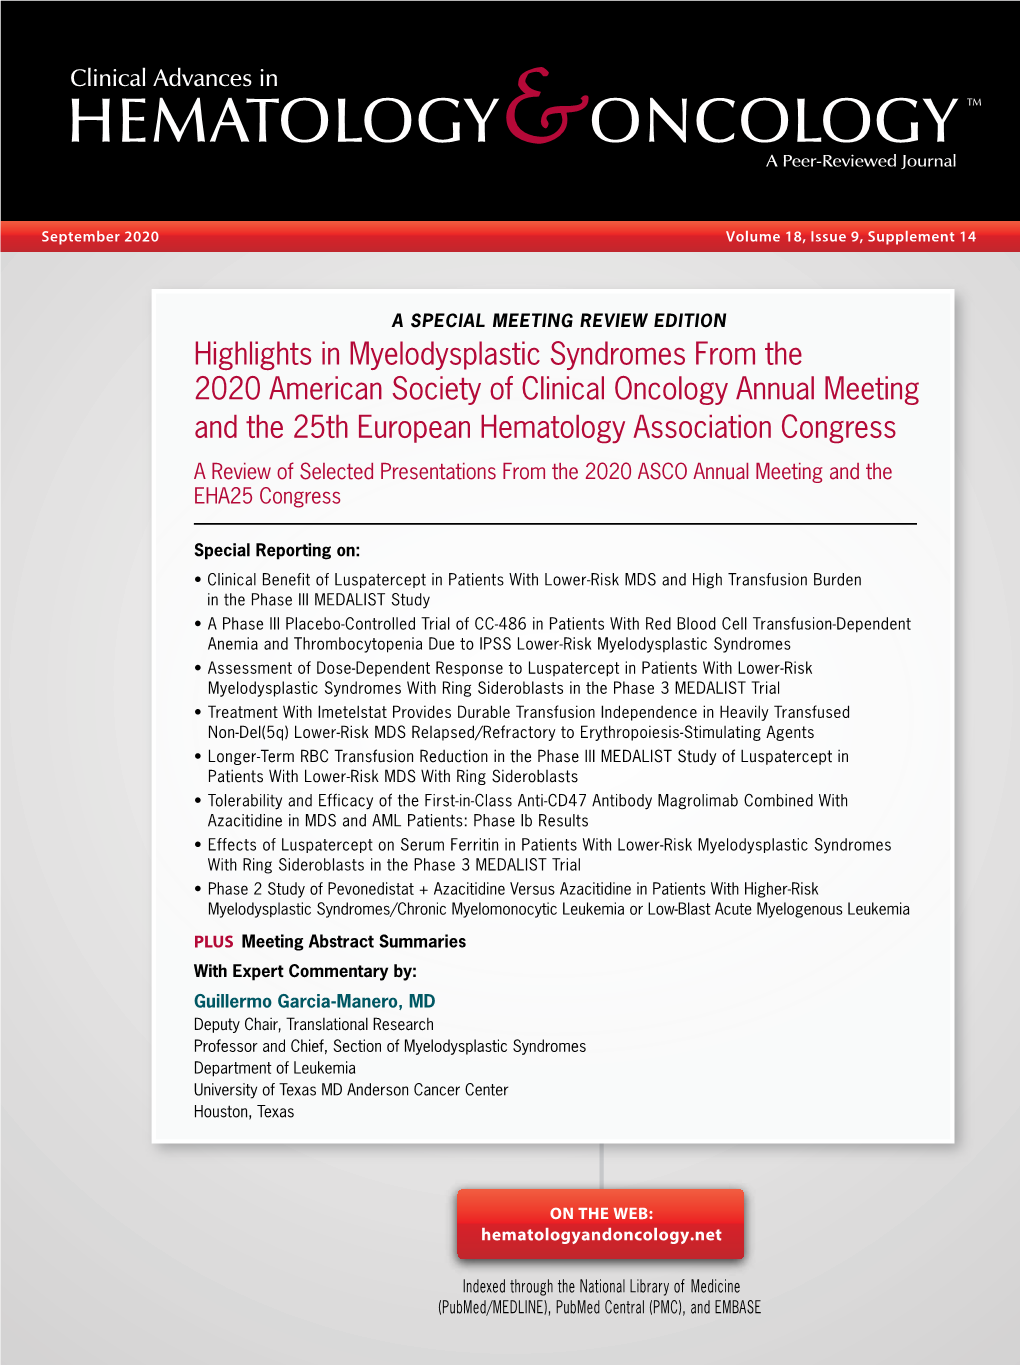 Highlights in Myelodysplastic Syndromes from the 2020 American Society of Clinical Oncology Annual Meeting and the 25Th European Hematology Association Congress